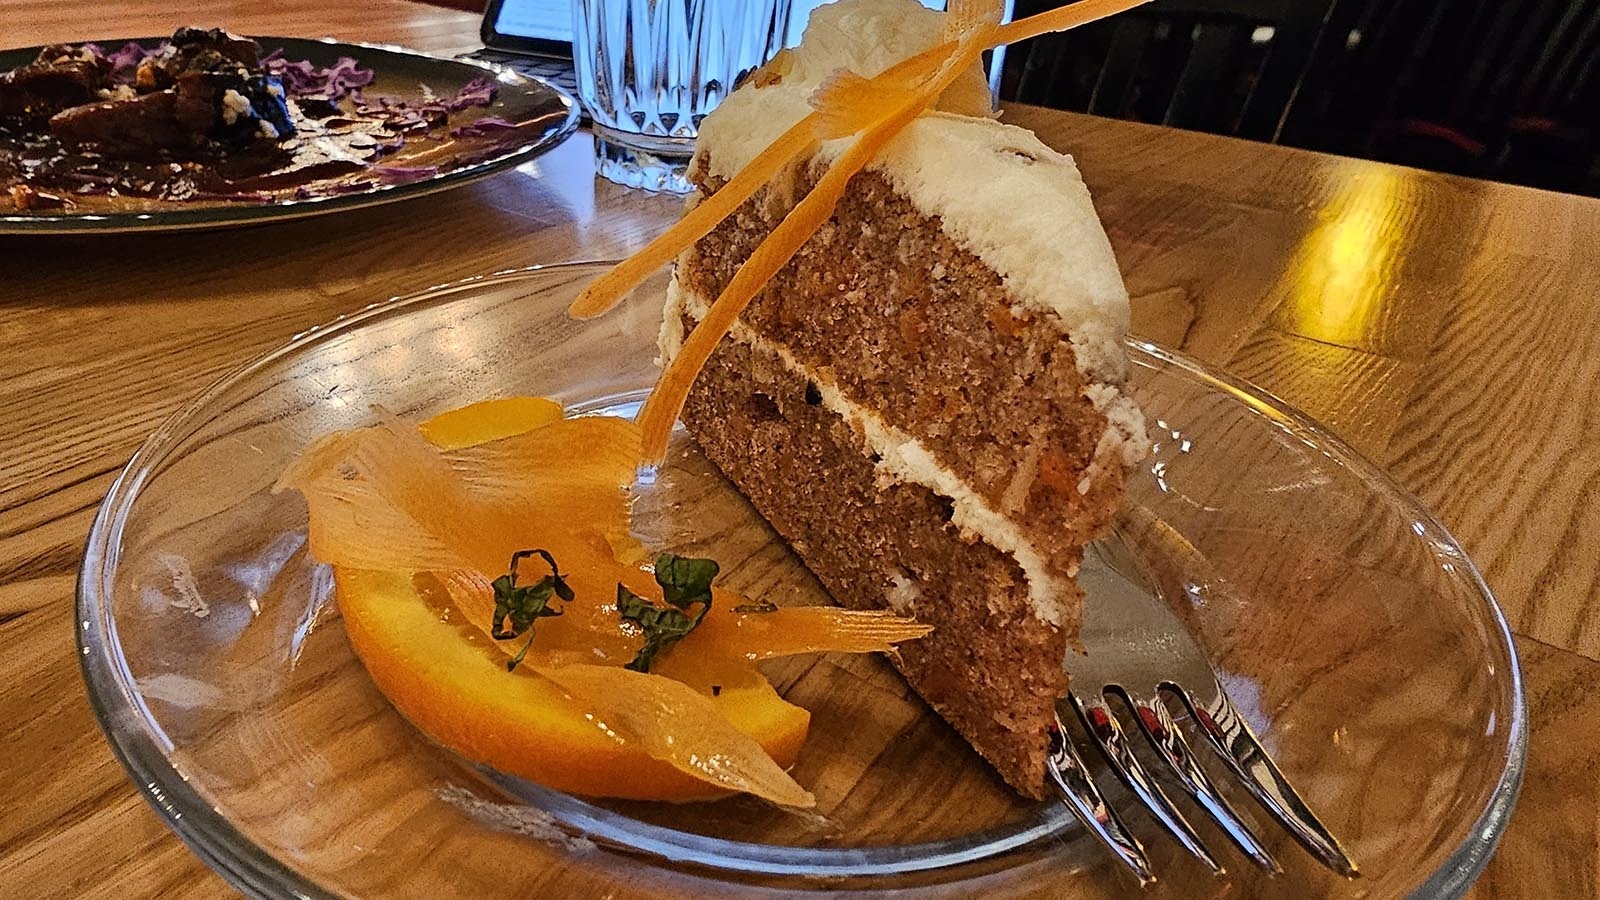 A slice of carrot cake was free with the meal, because Buck Buchenroth was testing out an idea for carrot cake for Easter Sunday.